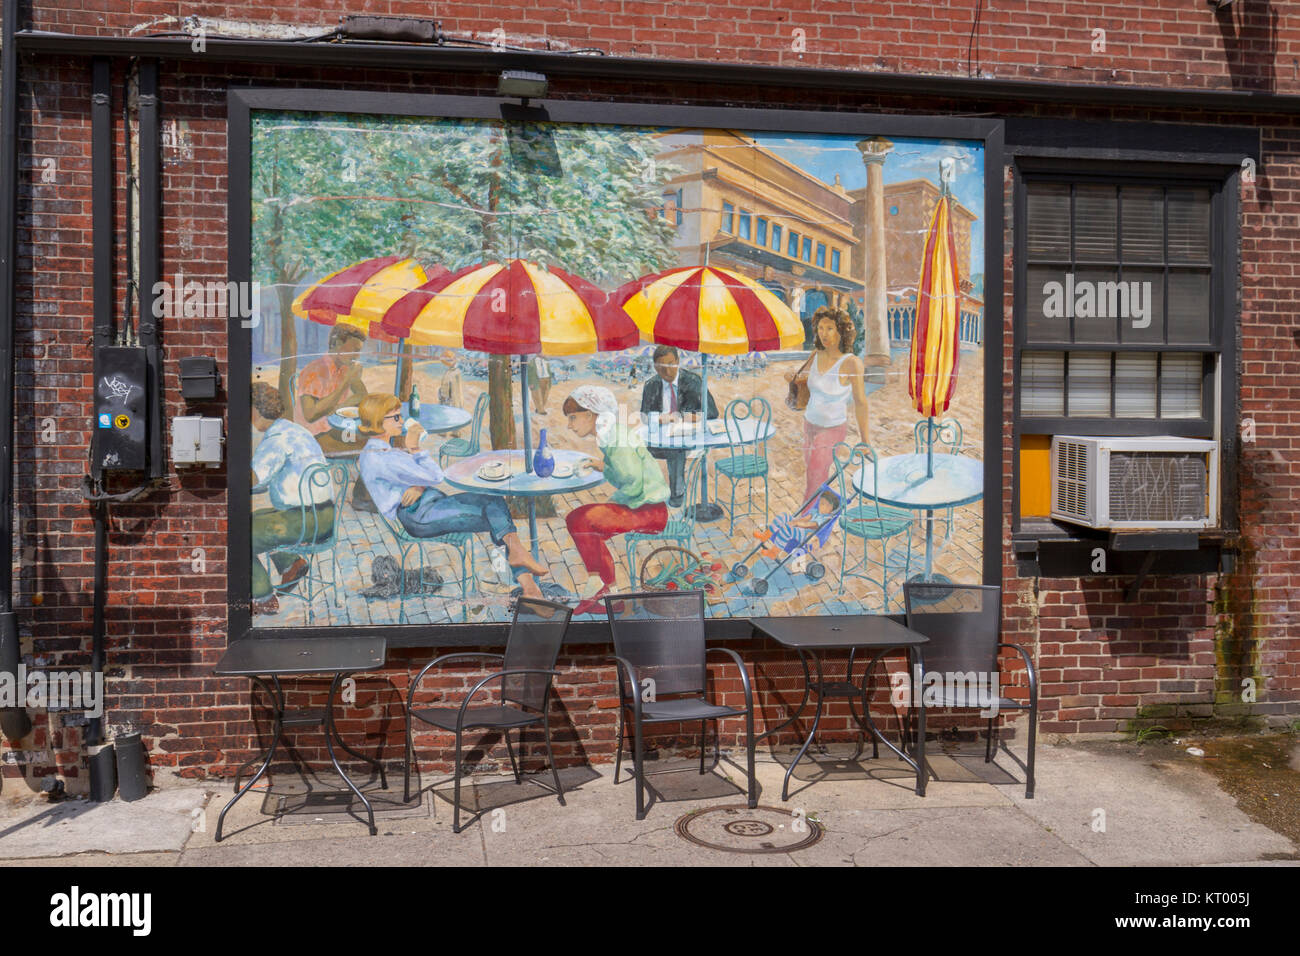 The beautiful external features of the Cafe Ole restaurant, 147 N 3rd St, Philadelphia, Pennsylvania, United States. Stock Photo